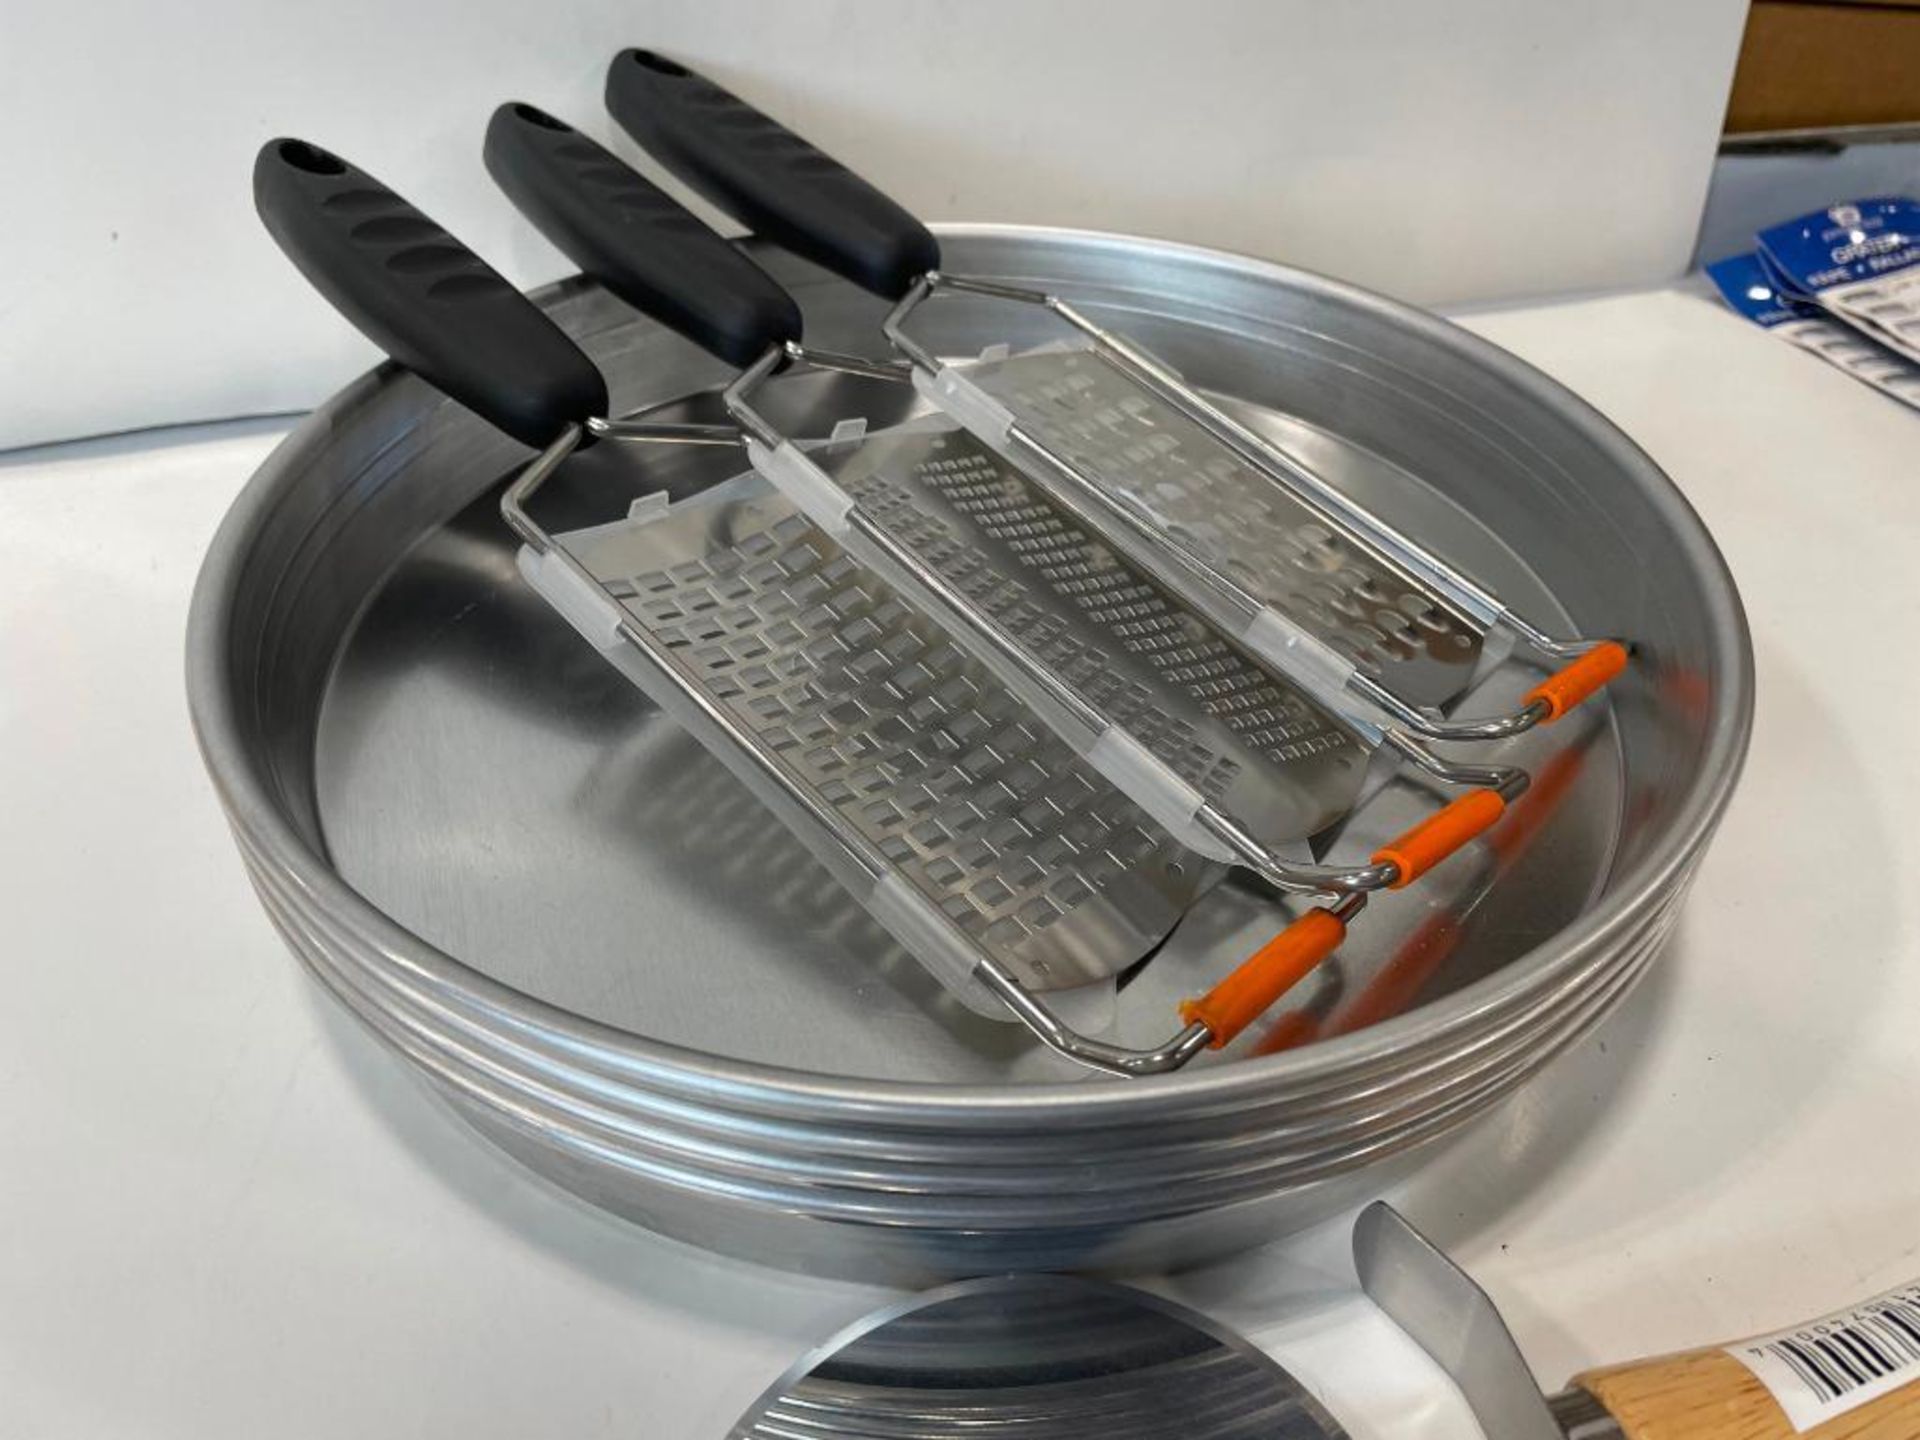 11" PIZZA PAN SET INCLUDING: (4) 15" PIZZA PANS, (2) PIZZA CUTTERS & (3) GRATERS - Image 7 of 9